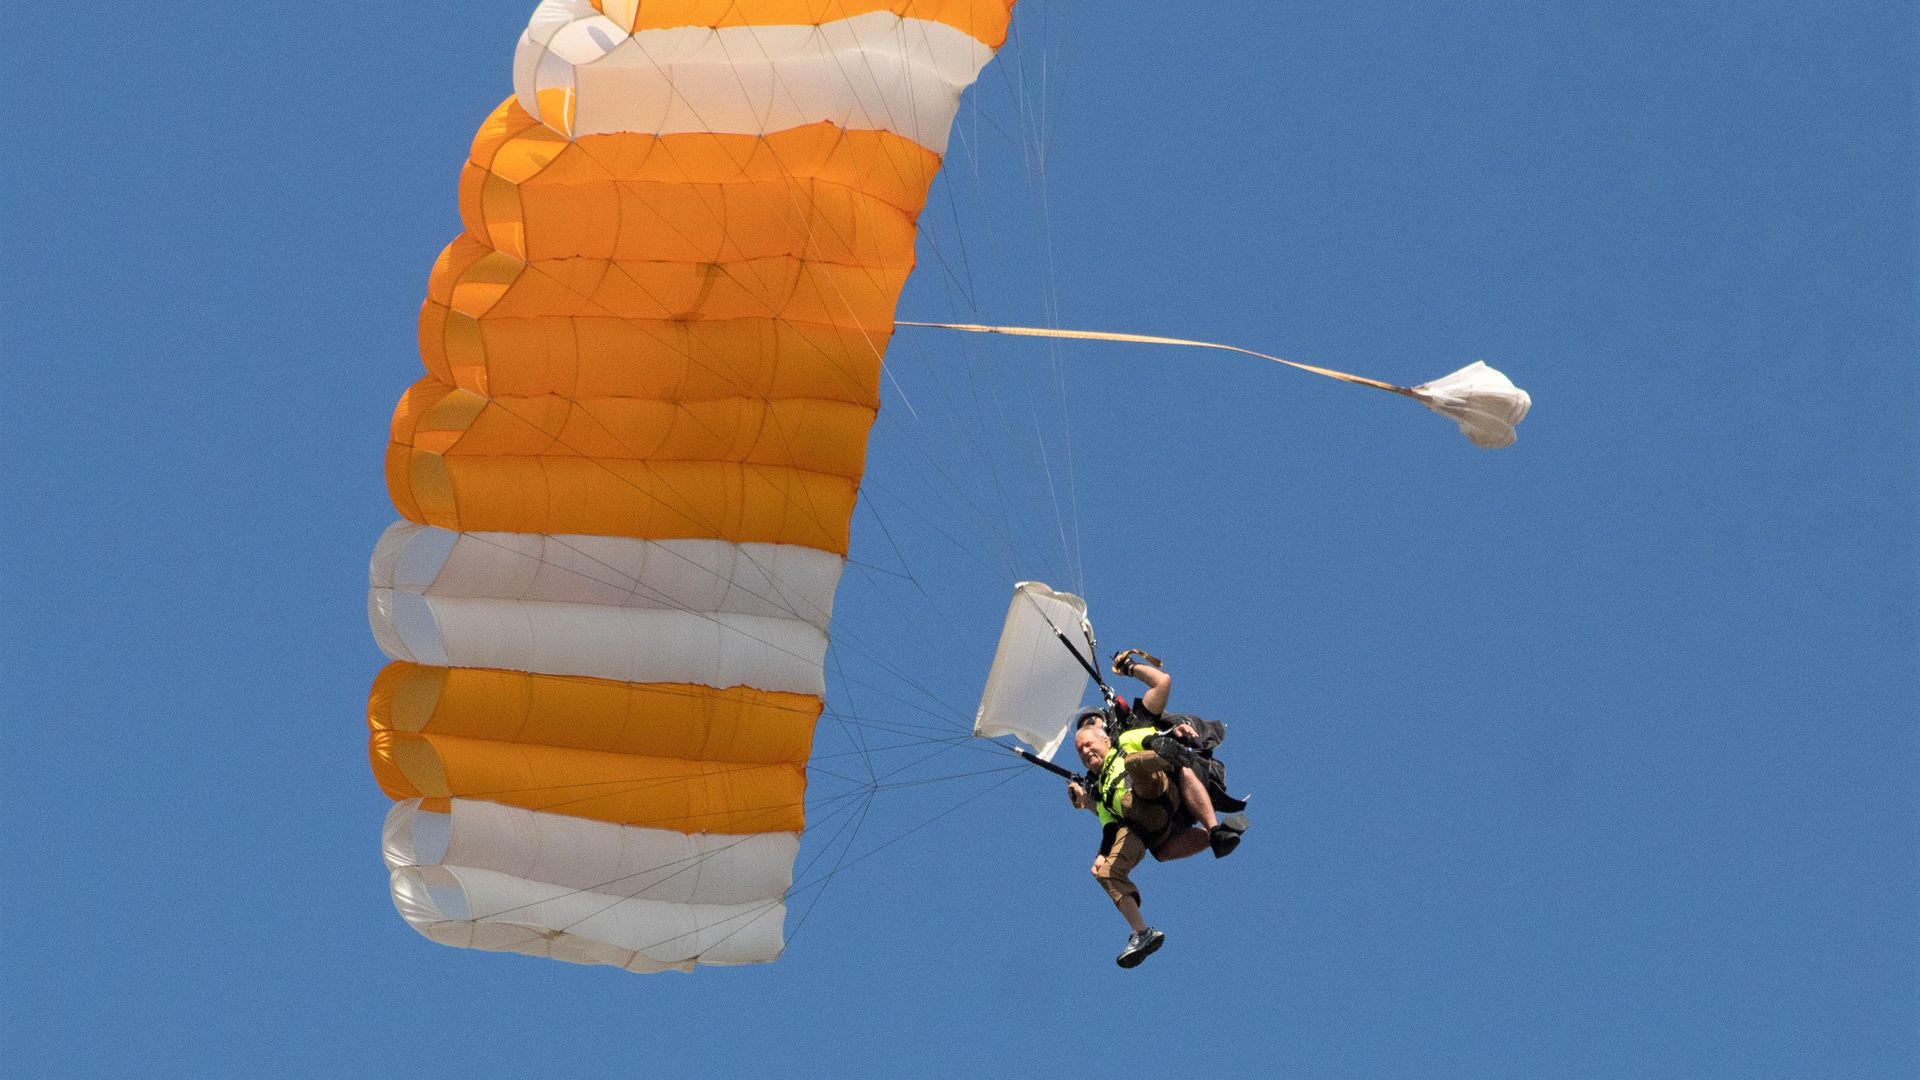 George Downing descends with a yellow-and-white parachute from the sky after skydiving.